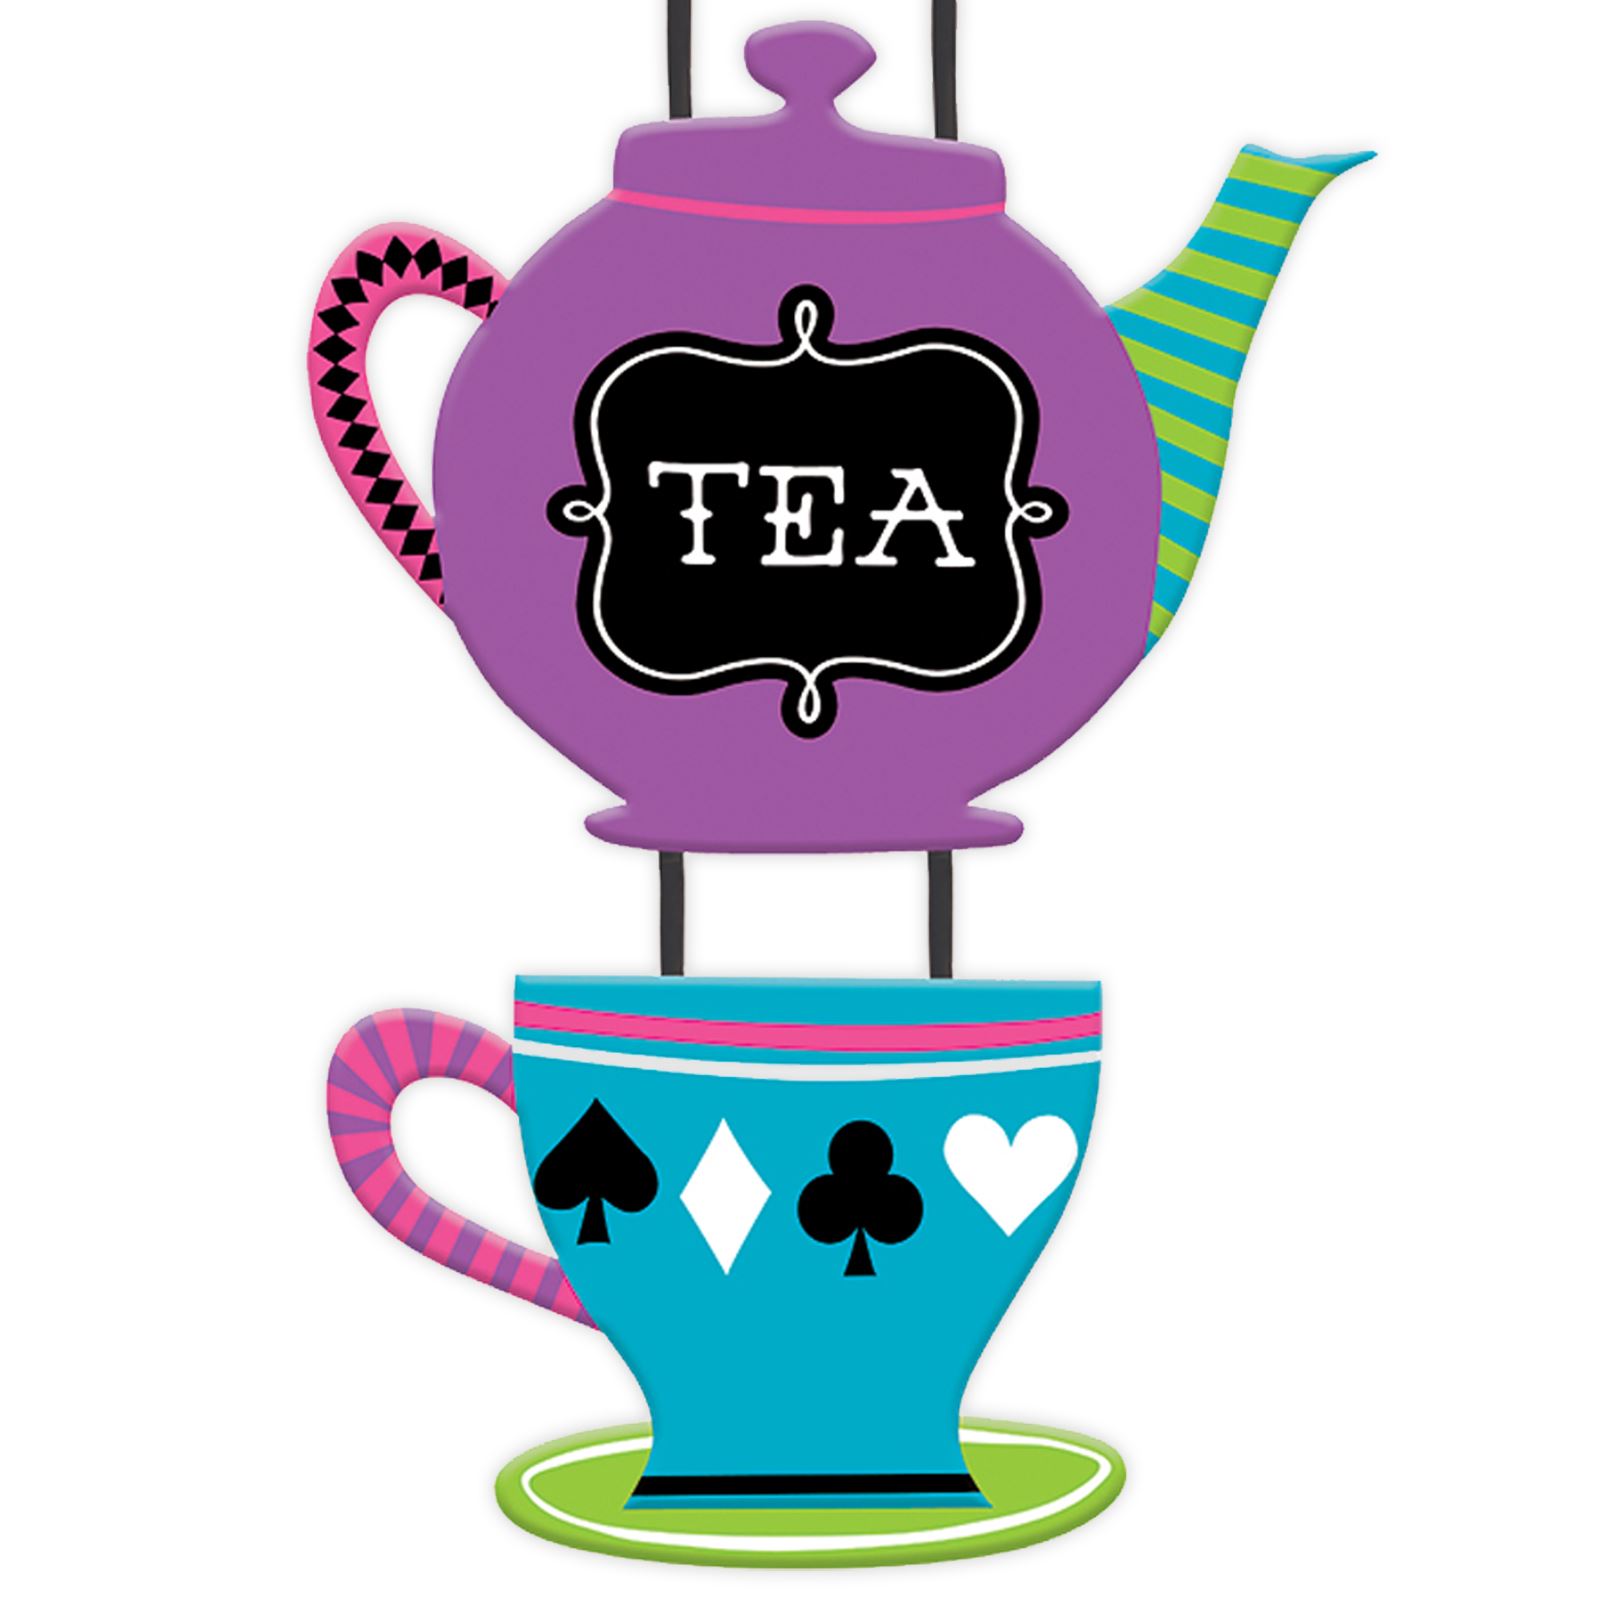 1082 Tea Party free clipart.